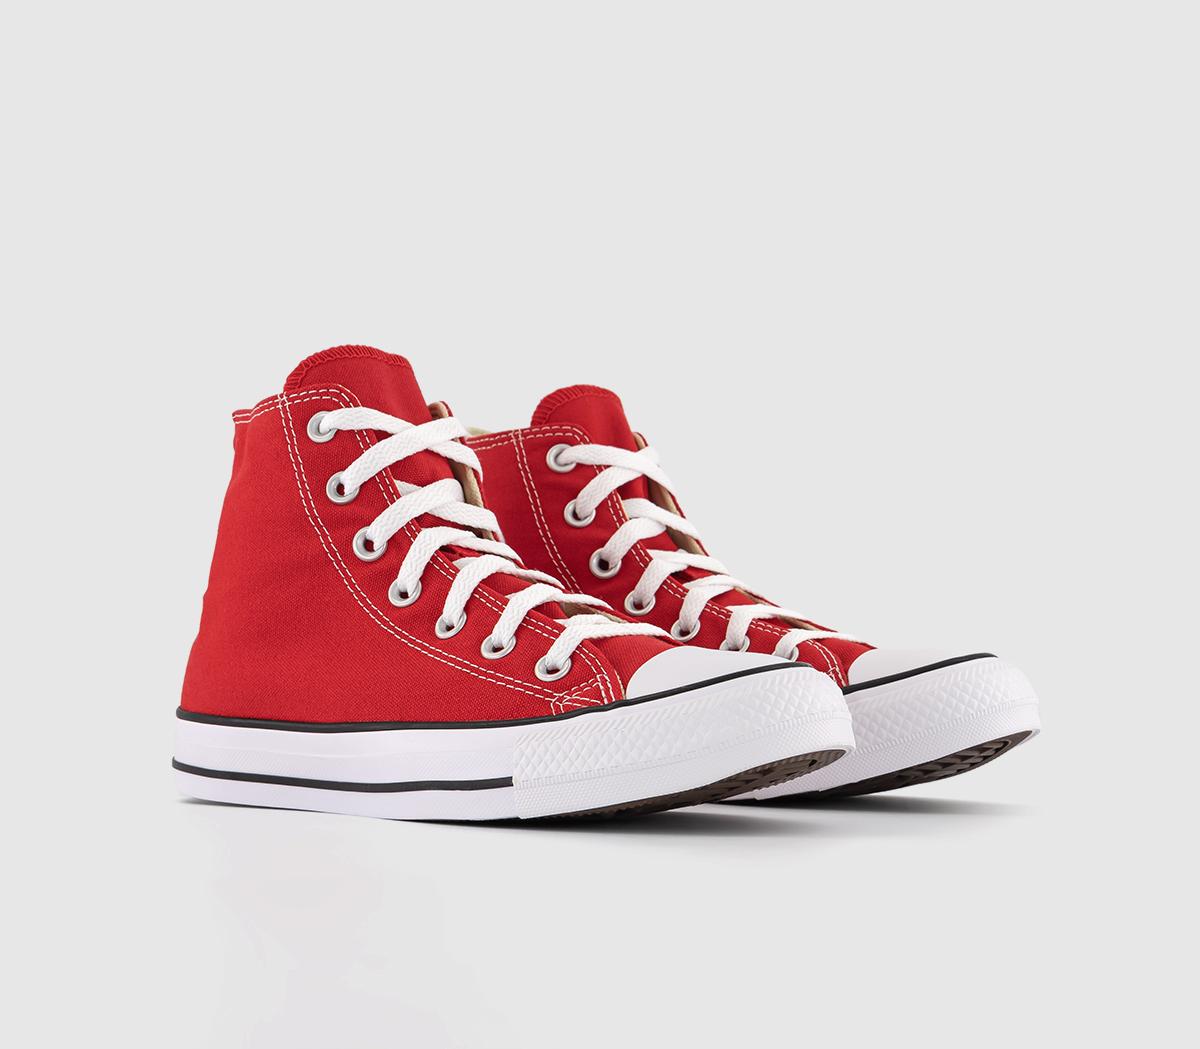 Converse All Star High Top Red And White Canvas Printed Classic Trainers, 6